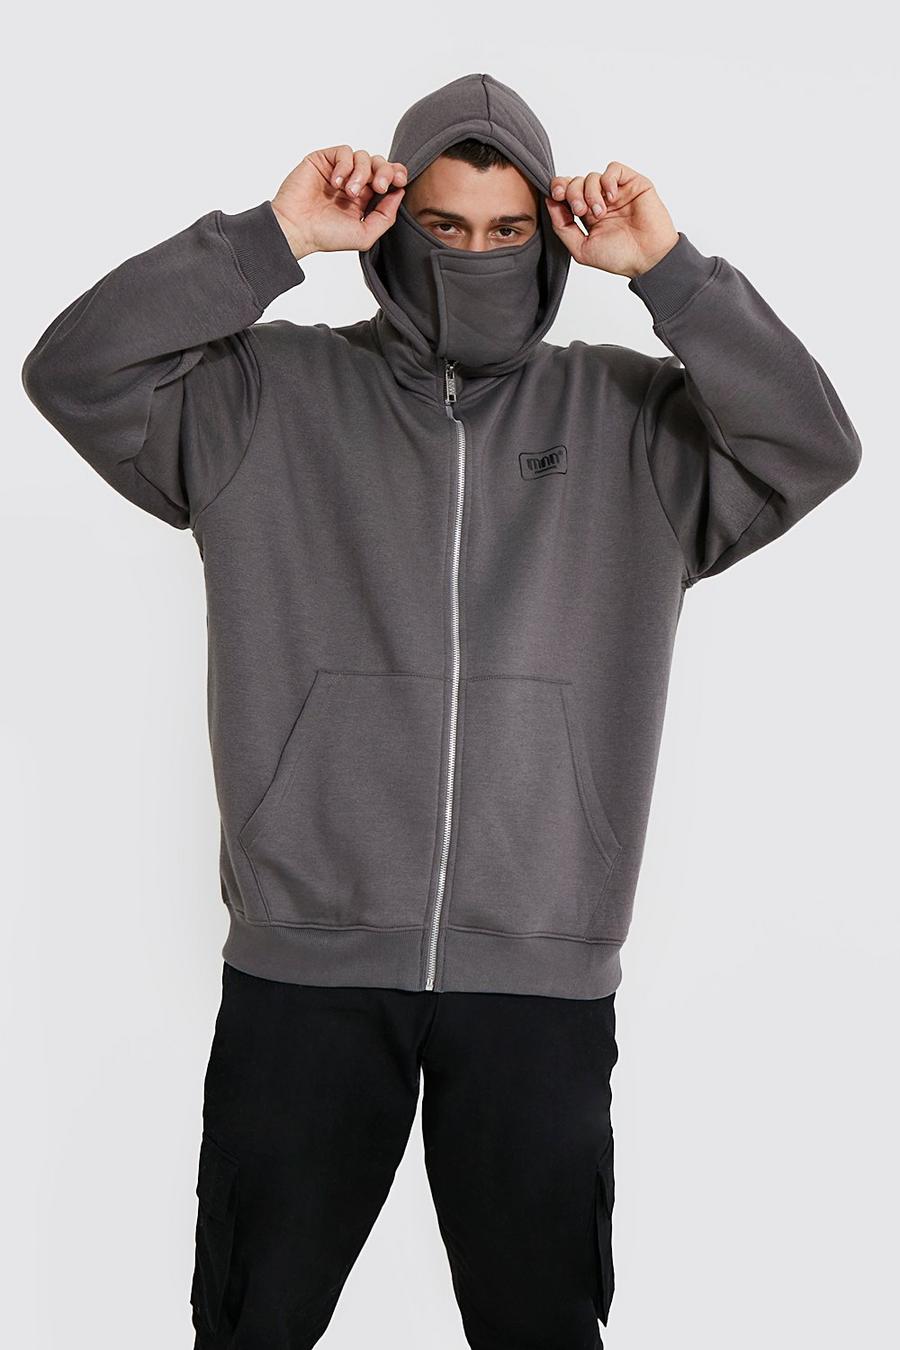 Charcoal grey Oversized Man Zip Hoodie With Face Covering